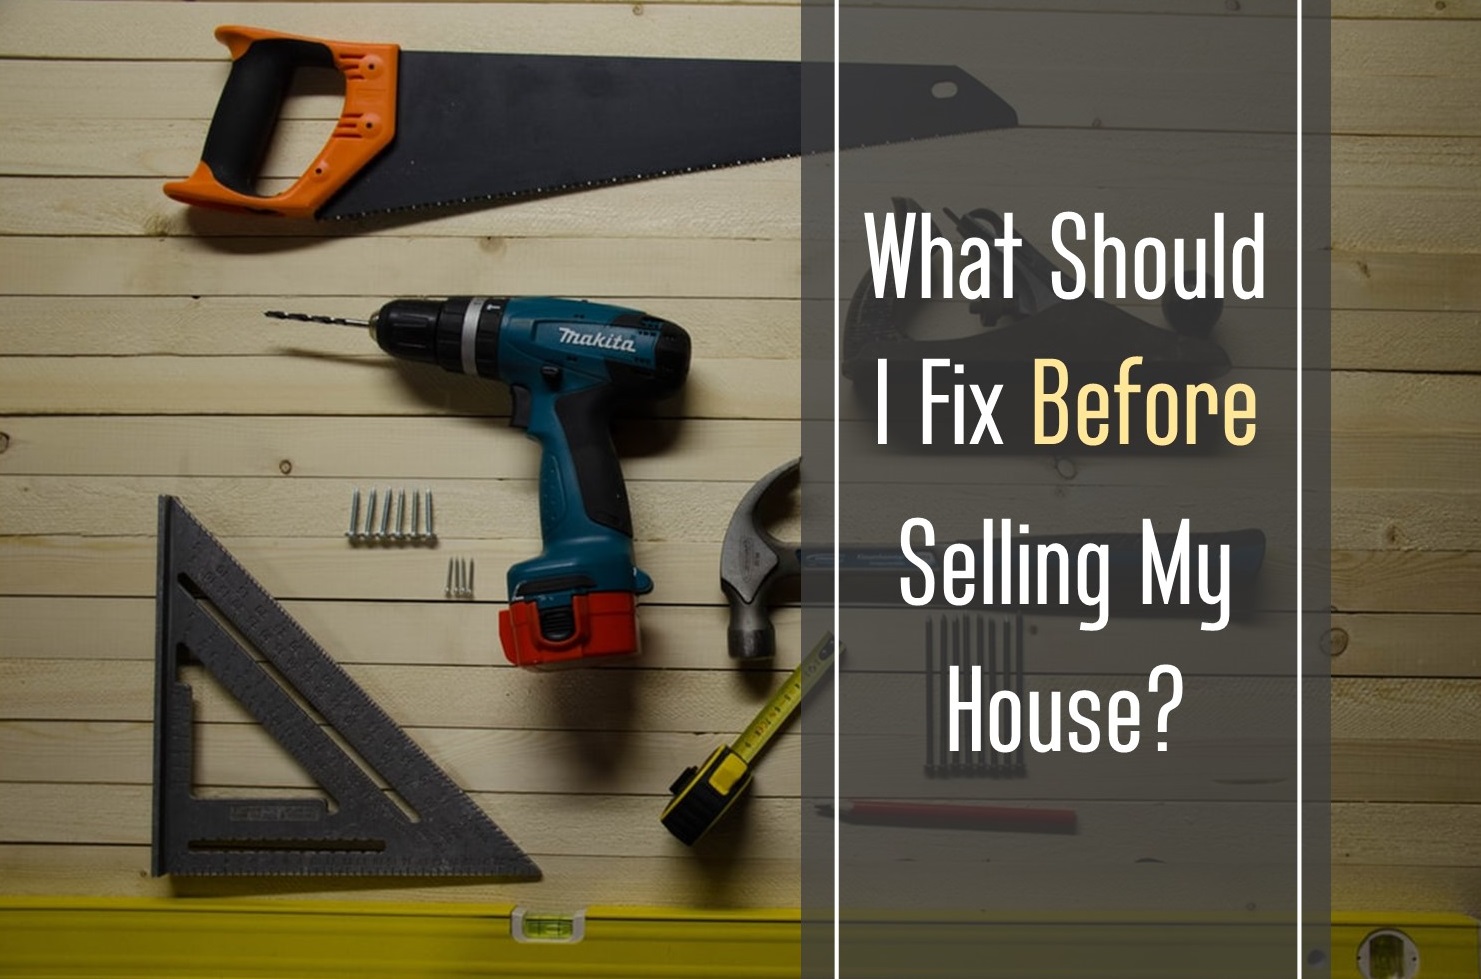 What Should I Fix Before Selling My House?